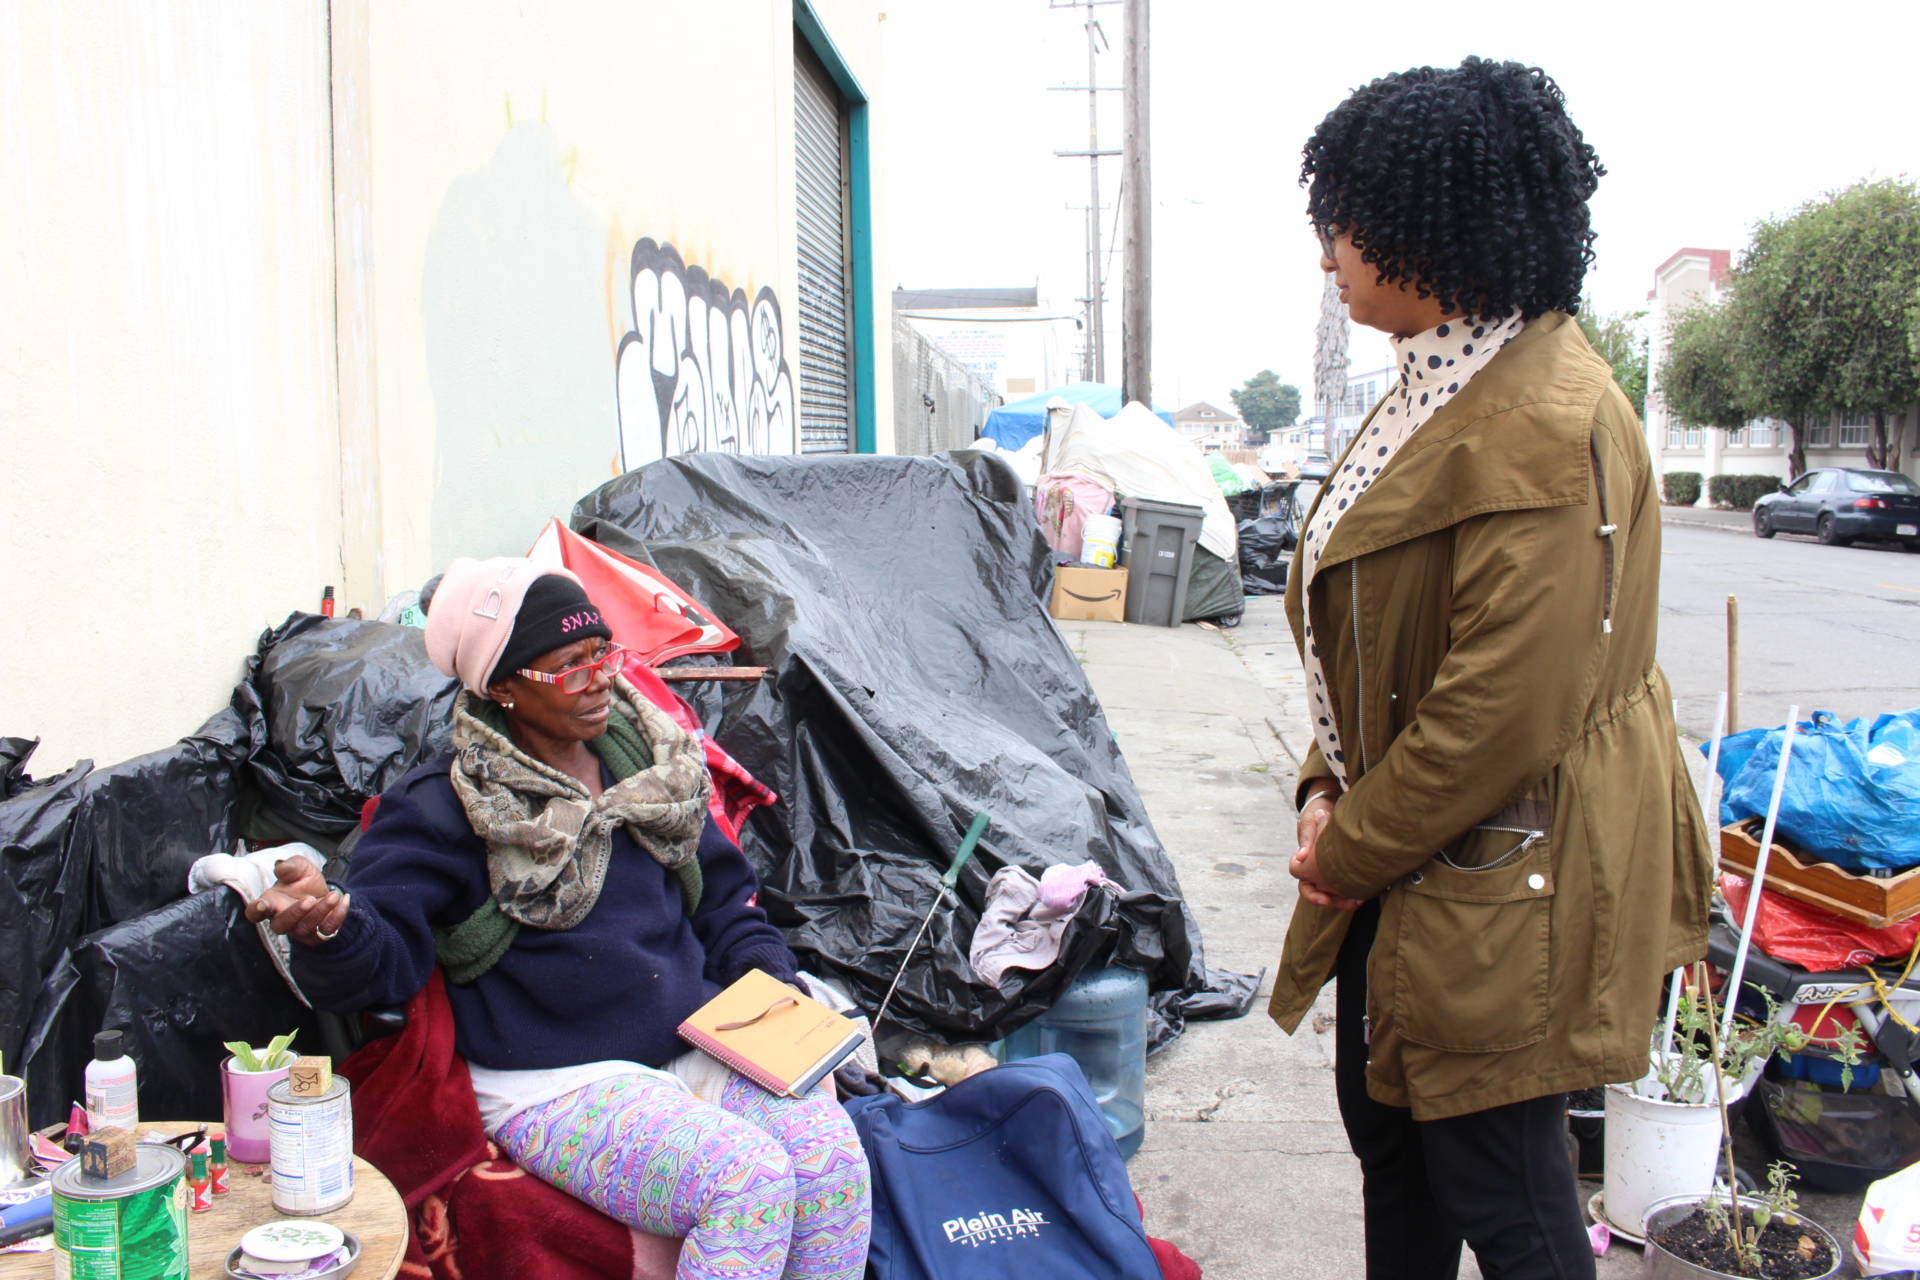 Homeless advocate Candice Elder, 34, checks in with Dorothy Smith, 65, at an encampment in Oakland on Aug. 24, 2018. Smith, who raised her children in the city, said her disability benefits are not enough to afford housing. 'It just don’t support me,' she said.
 Farida Jhabvala Romero/KQED